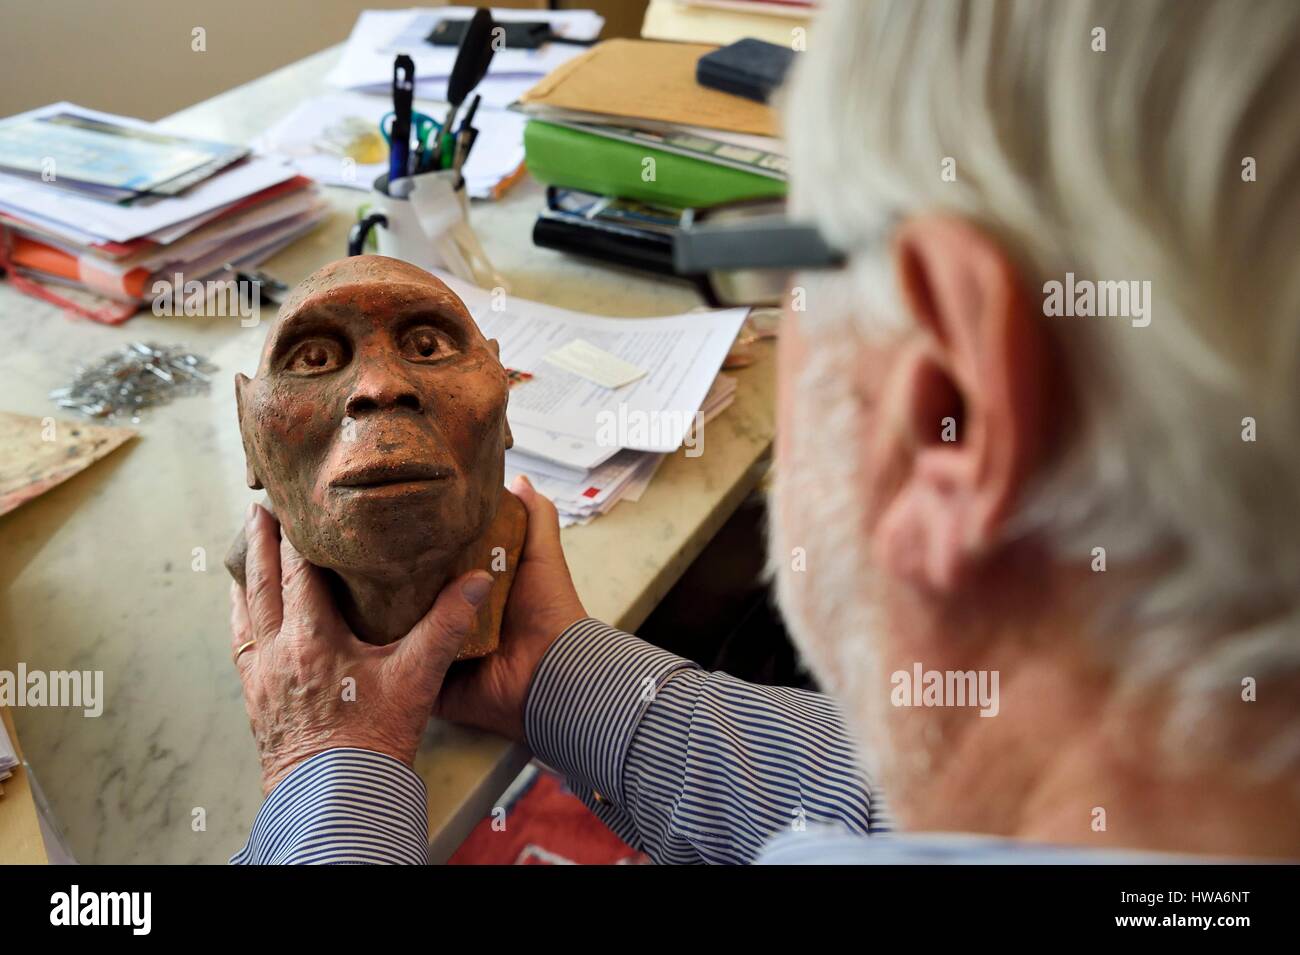 France, Paris, the french paleontologist and paleoanthropologist Yves Coppens, professor at the College de France, in the office of his home in Paris, Stock Photo